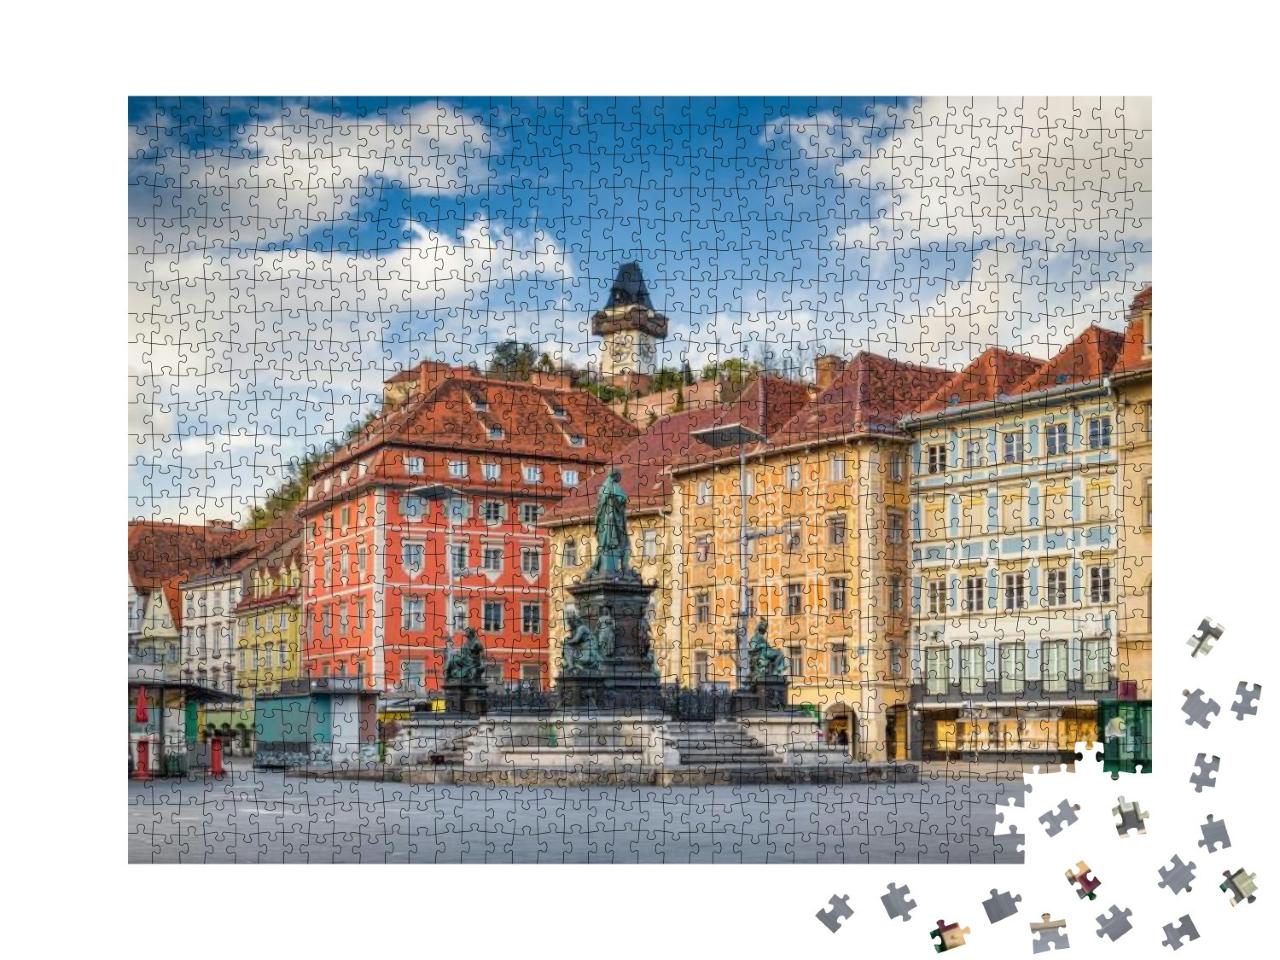 Classic View of the Historic City of Graz with Main Squar... Jigsaw Puzzle with 1000 pieces